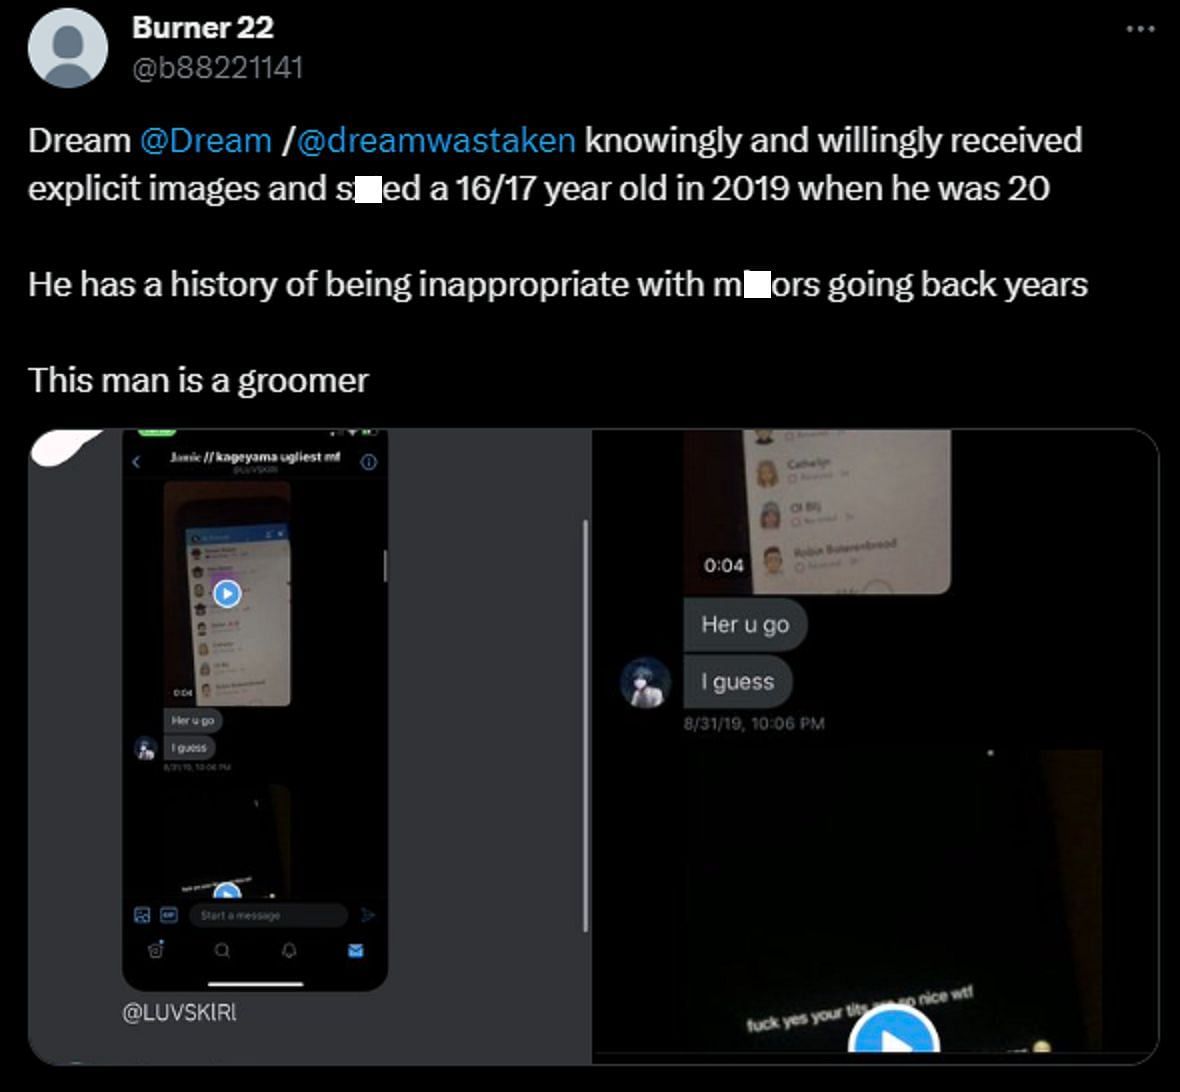 The burner account accuses the streamer of sending inappropriate messages (Image via X/@b88221141)